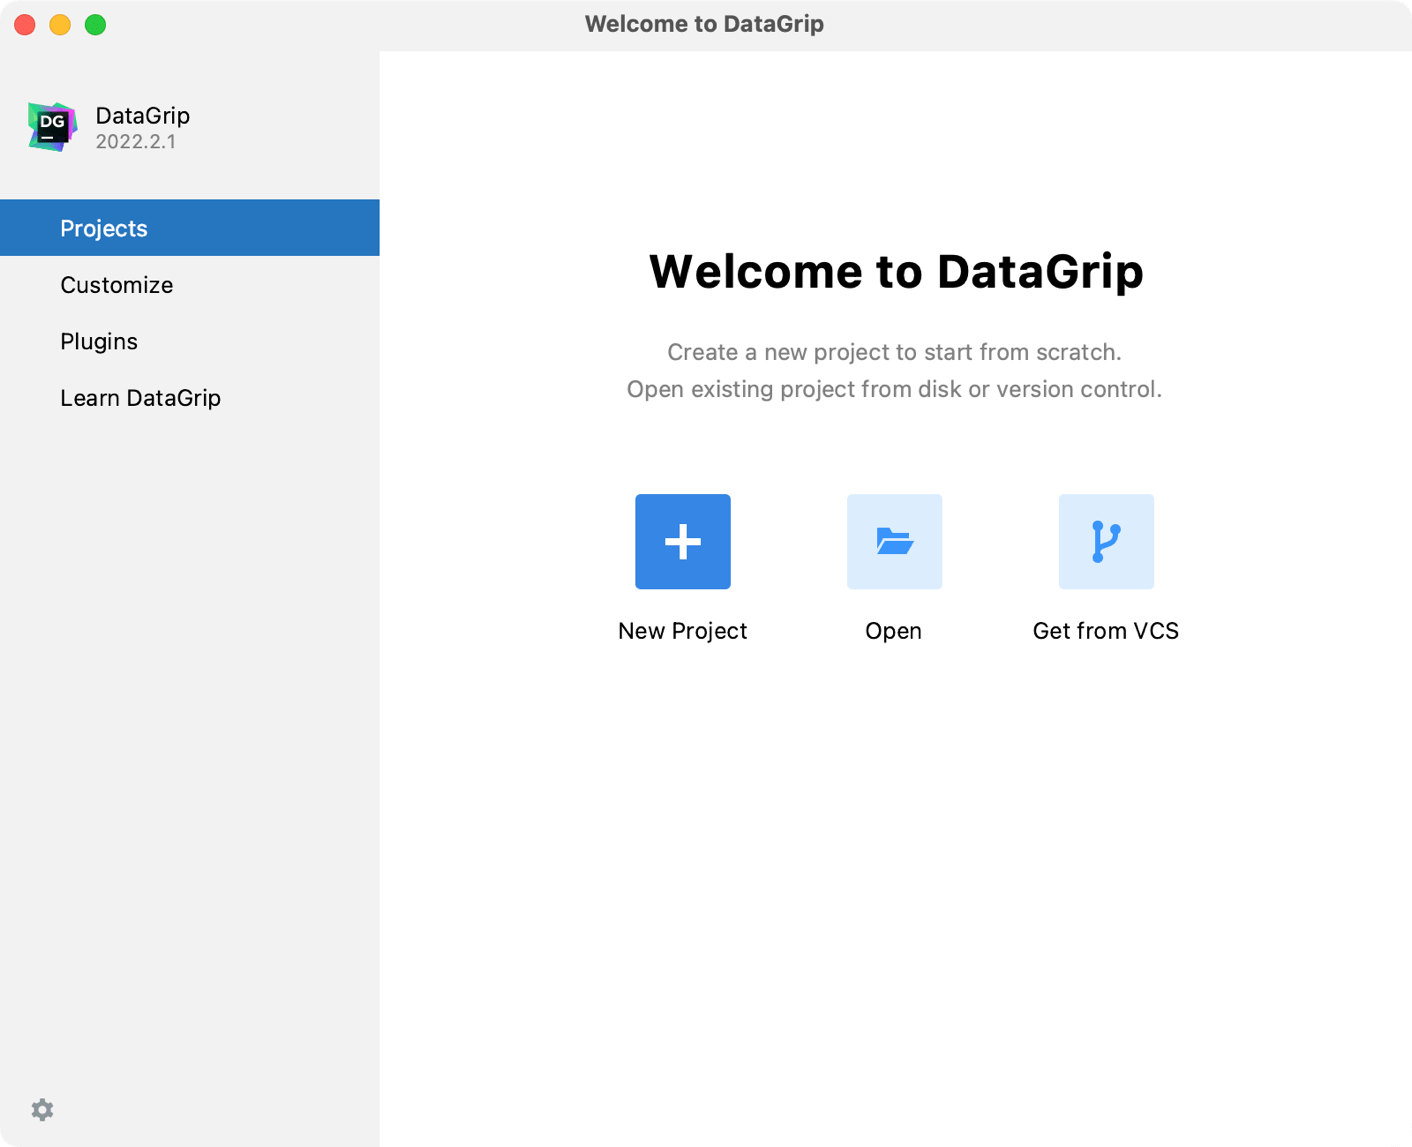 DataGrip project overview